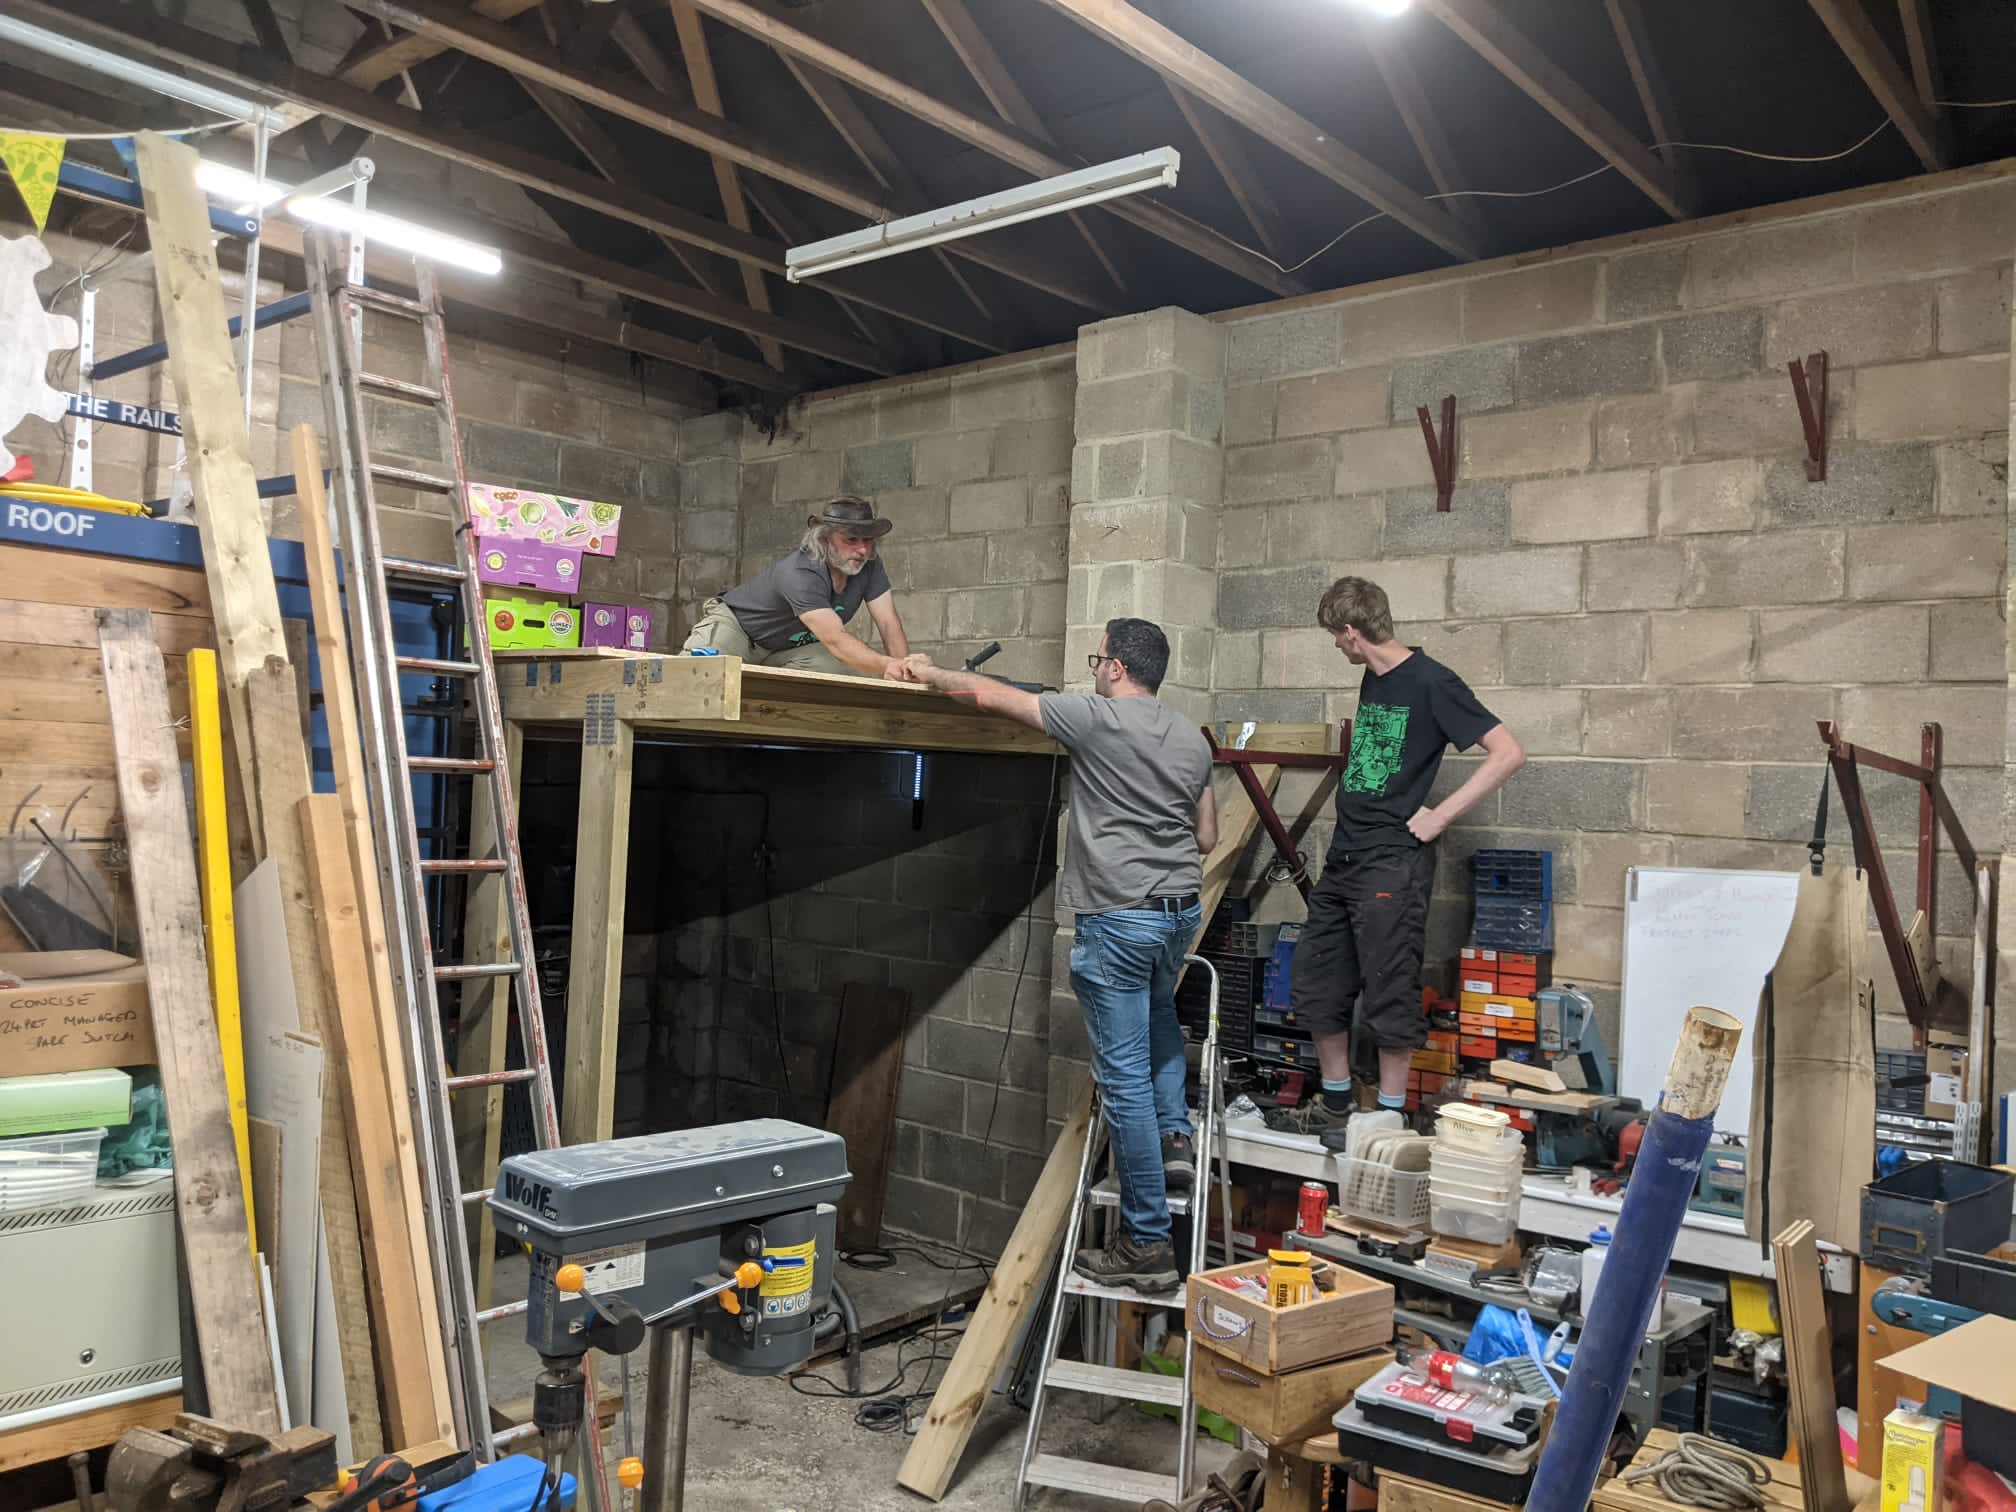 The Makerspace's Mezzanine being built, fitting the OSB floor.